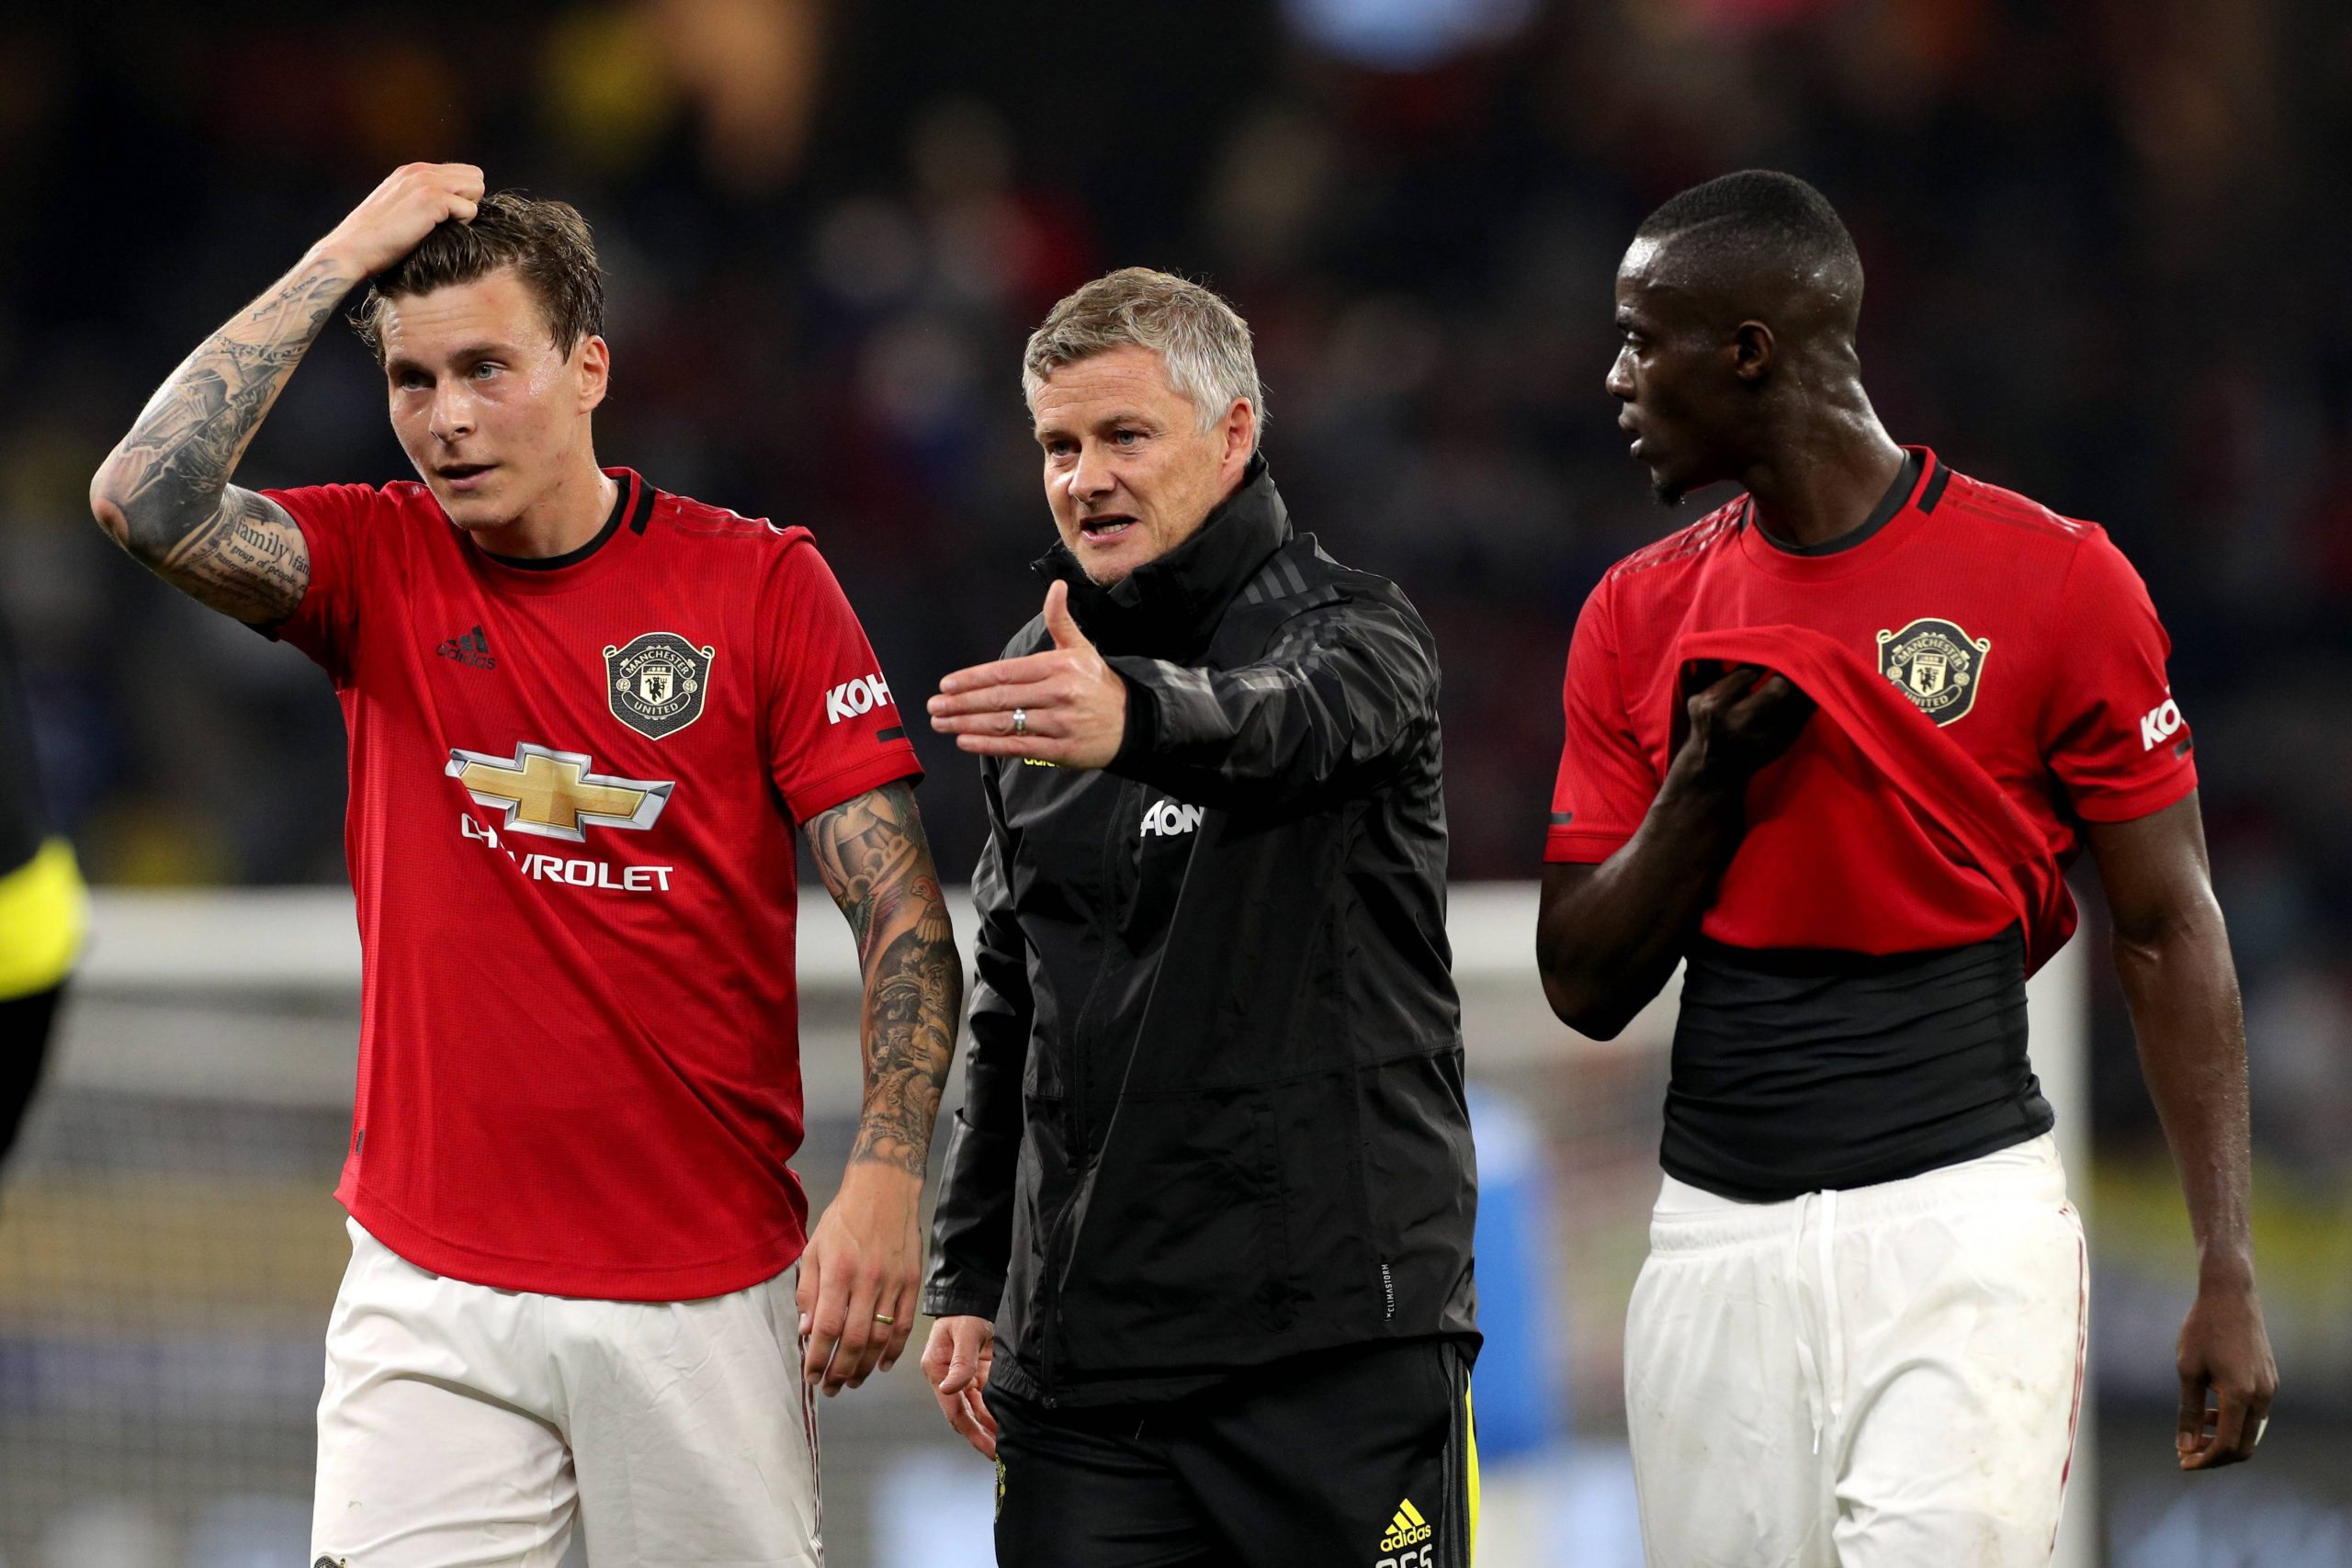 Eric Bailly and Victor Lindelof with Manchester United manager, Ole Gunnar Solskjaer.